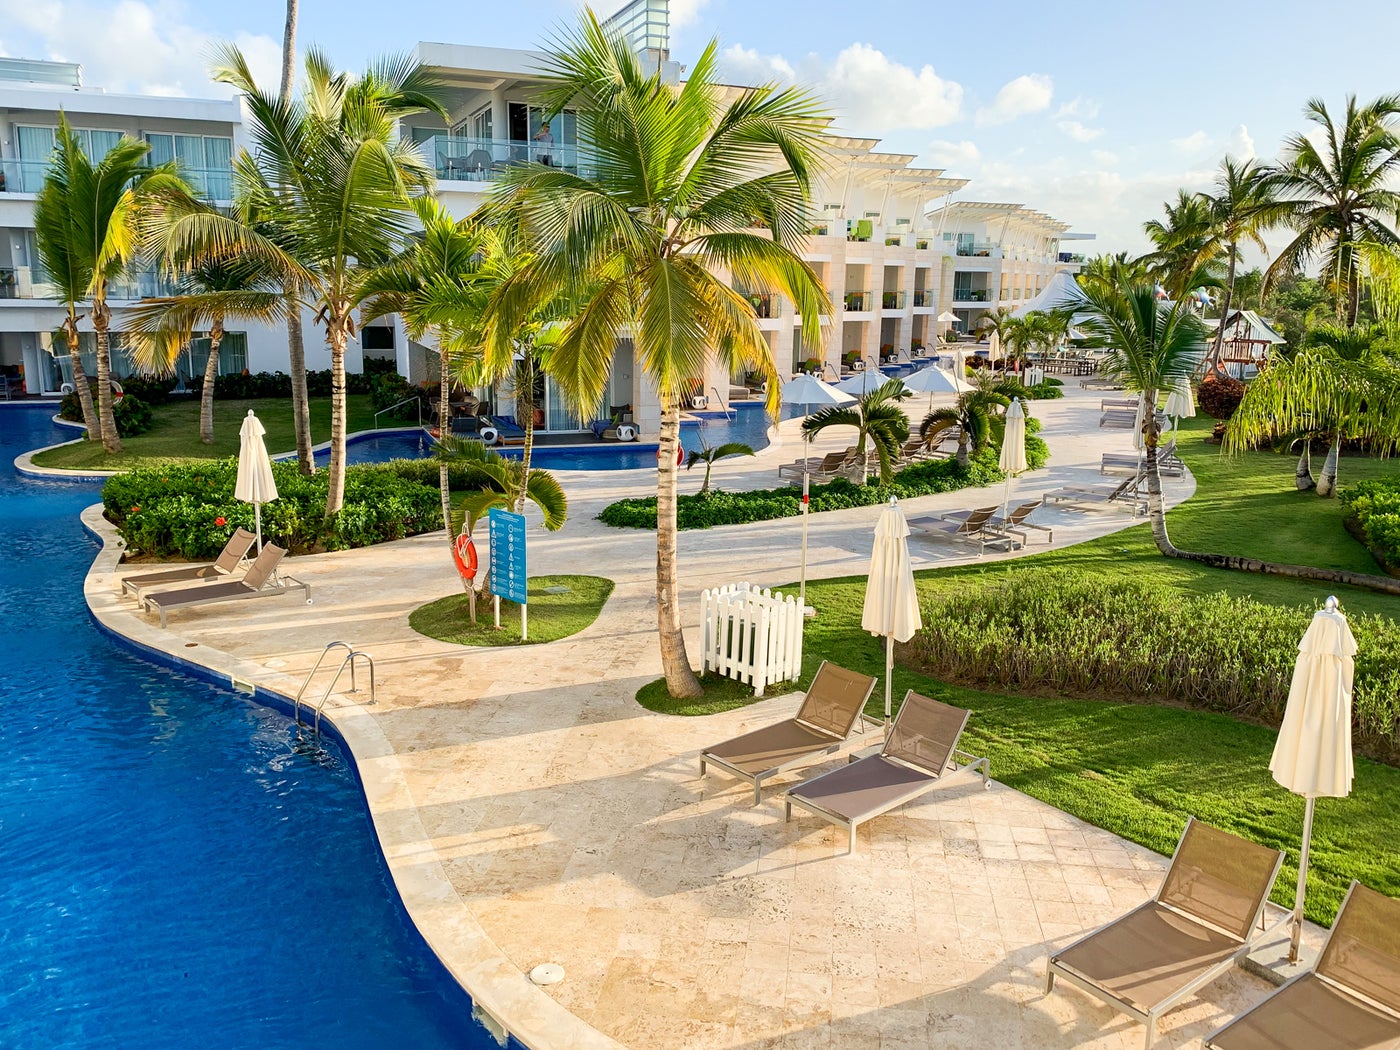 Review: Nickelodeon Hotels & Resorts Punta Cana, a Family All-Inclusive